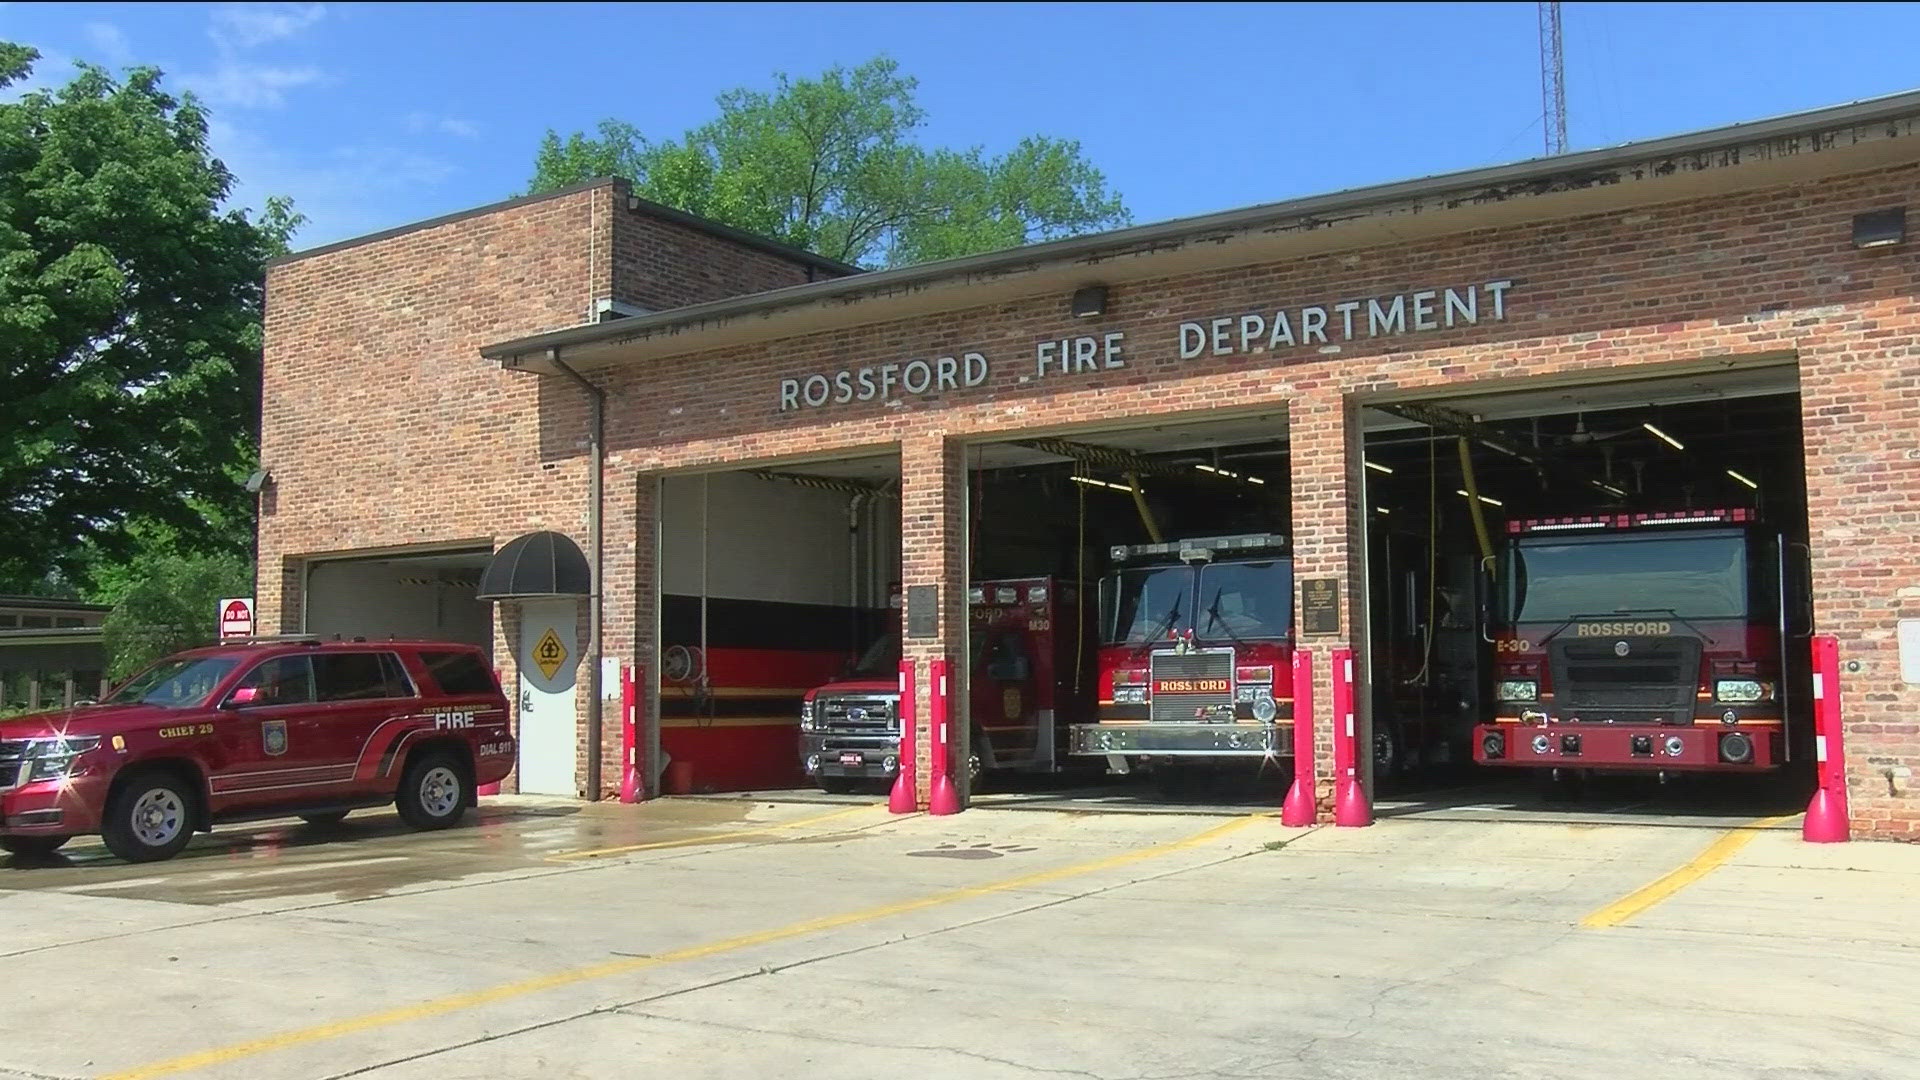 Through the staffing troubles the city of Rossford's fire department has faced before, Mayor MacKinnon believes there are viable solutions on the horizon.